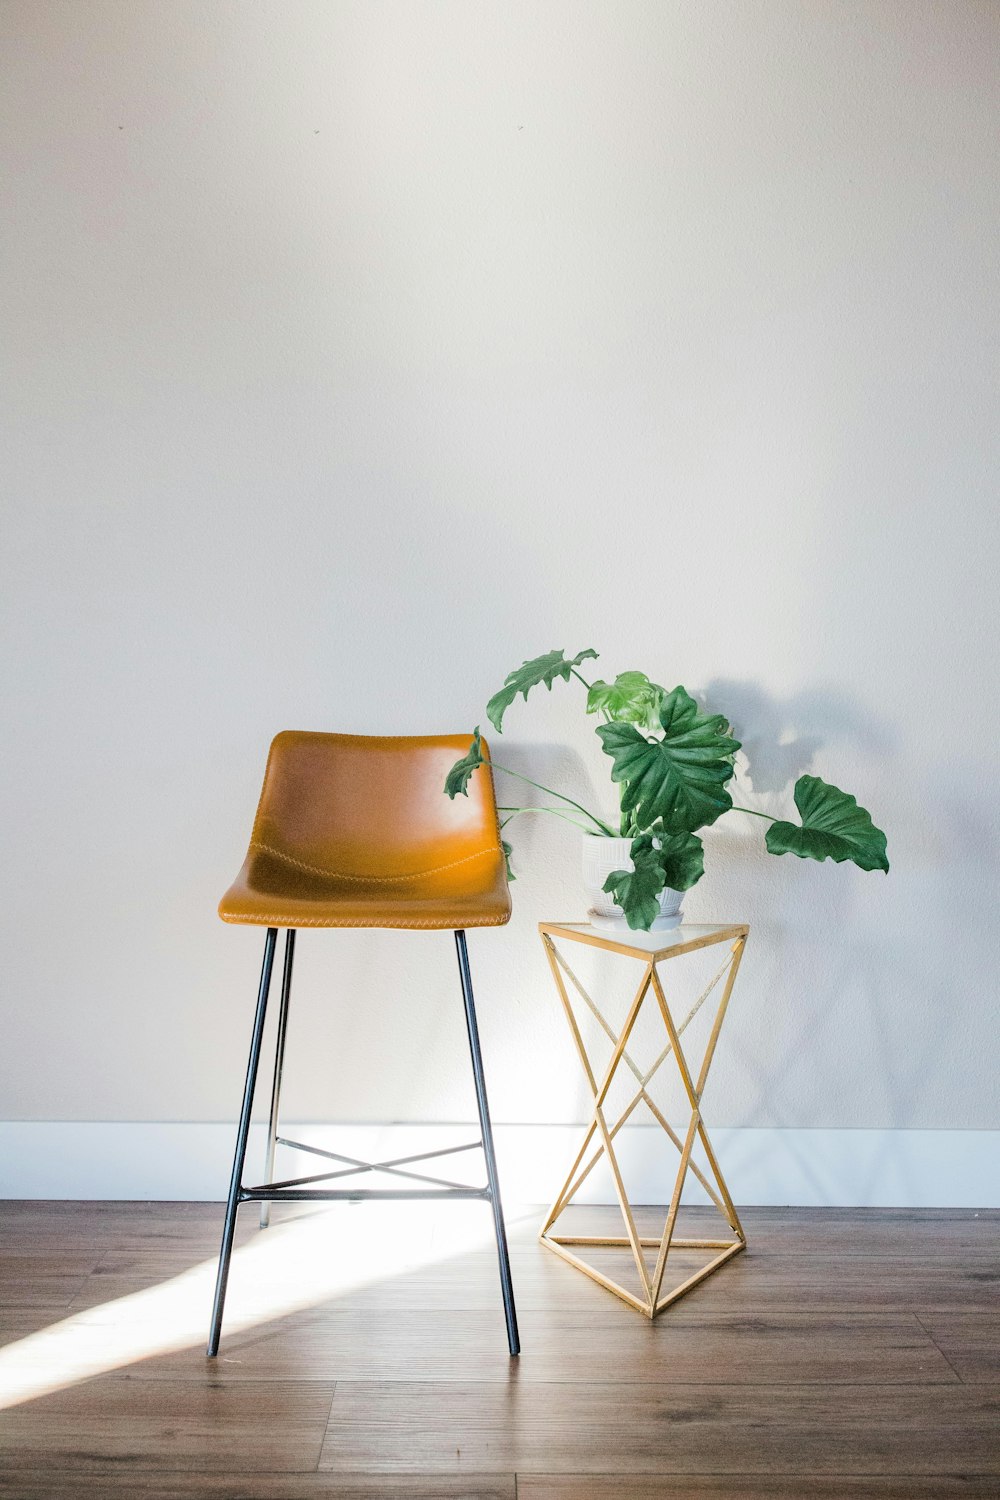 a chair next to a plant on a wooden floor